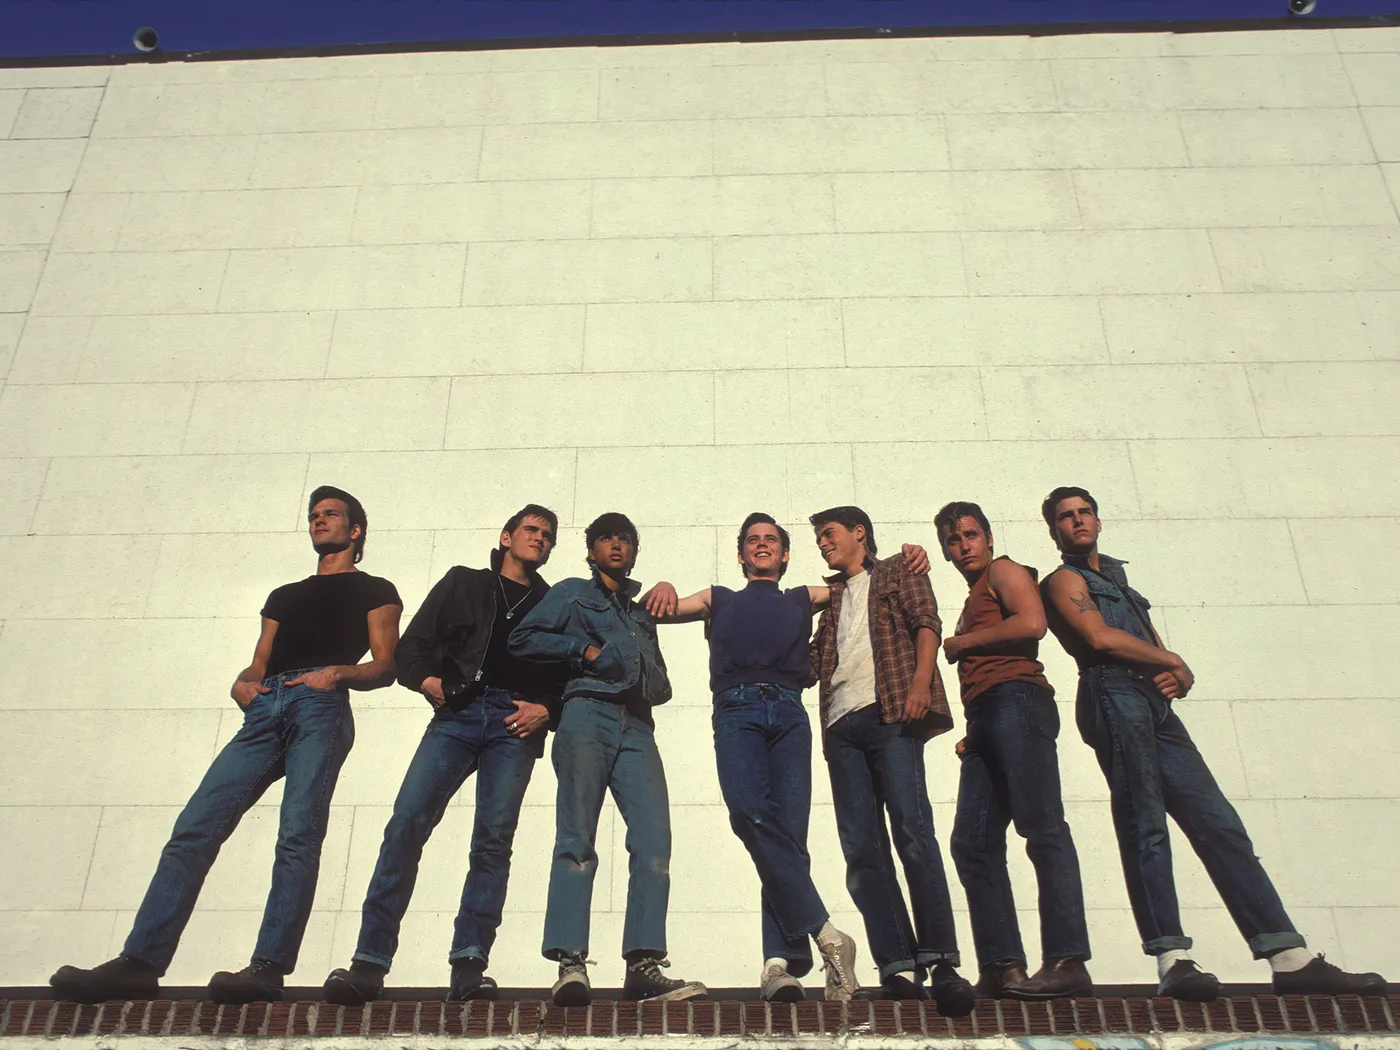 The cast of The Outsiders pose in front of a brick wall